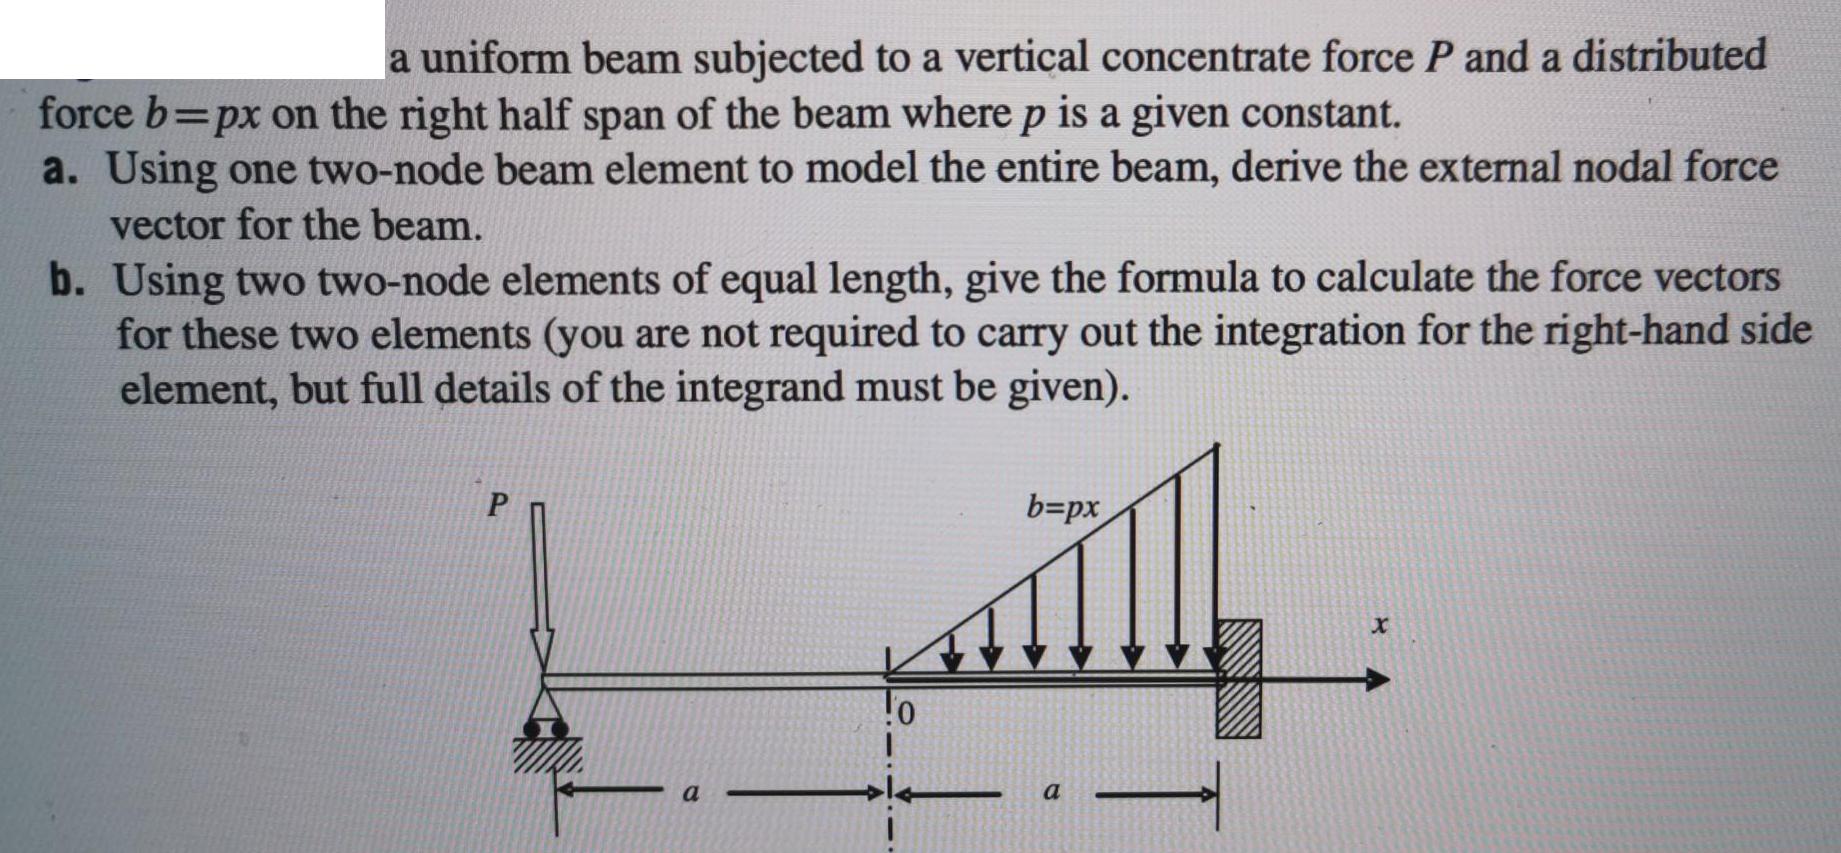 a uniform beam subjected to a vertical concentrate force P and a distributed force b=px on the right half